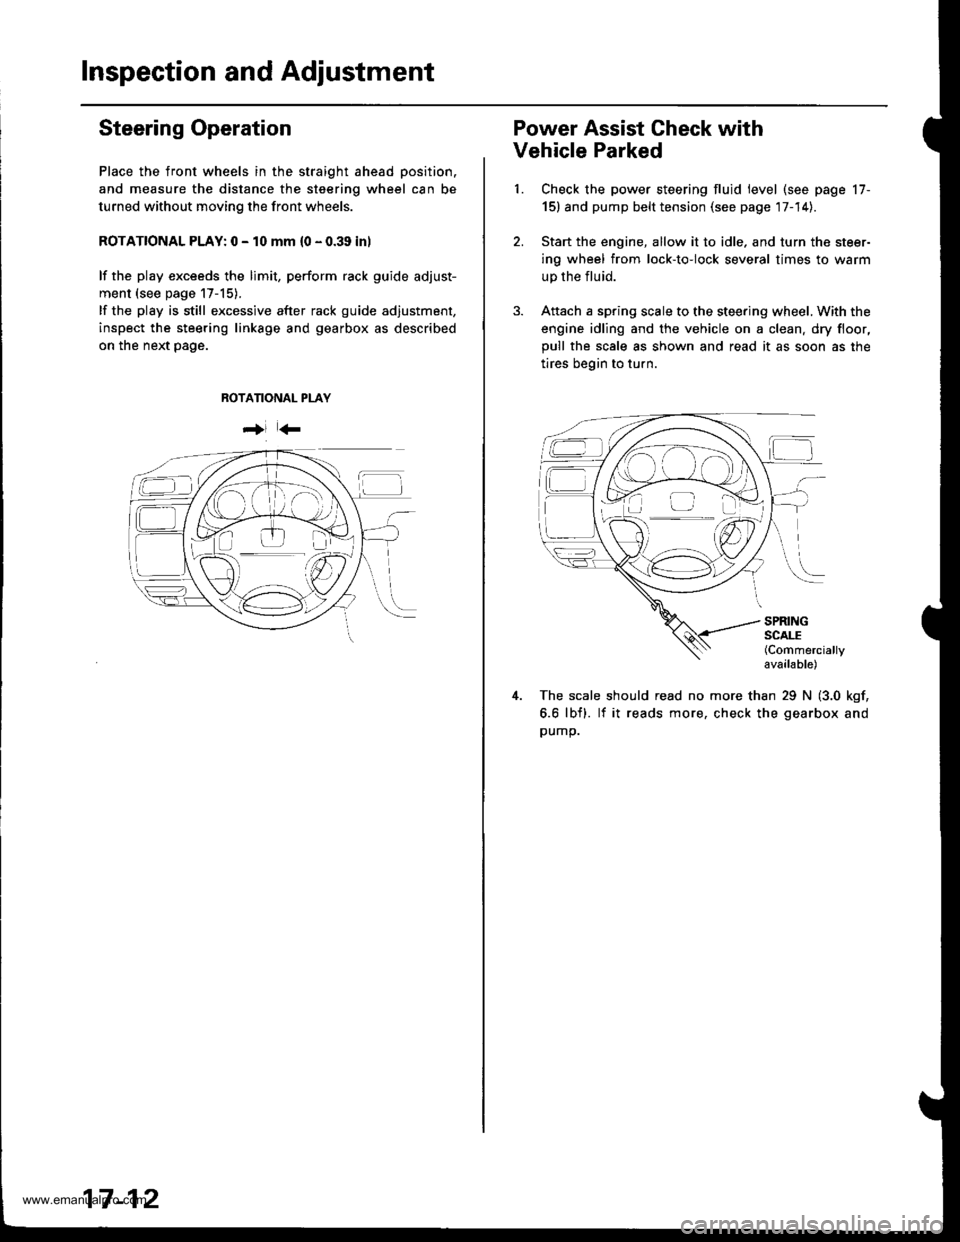 HONDA CR-V 1999 RD1-RD3 / 1.G Owners Guide 
Inspection and Adjustment
Steering Operation
Place the front wheels in the straight ahead position.
and measure the distance the steering wheel can be
turned without moving the front wheels.
ROTATION